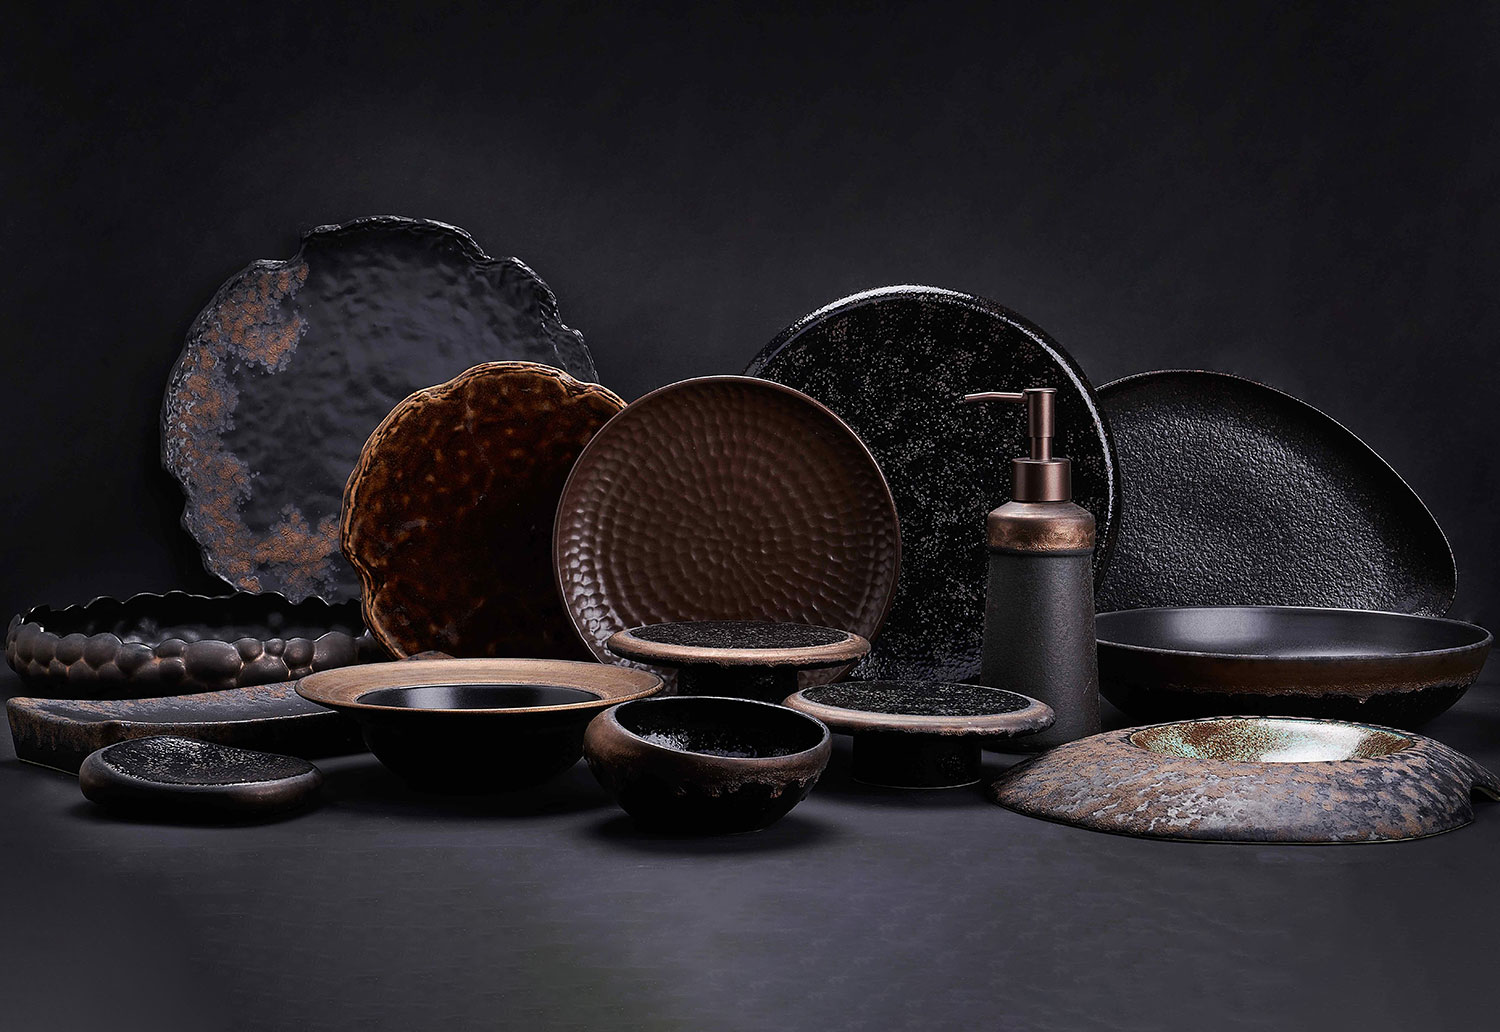 Kevala Ceramics in collaboration with Tom Aikens made for The Langham Restaurant